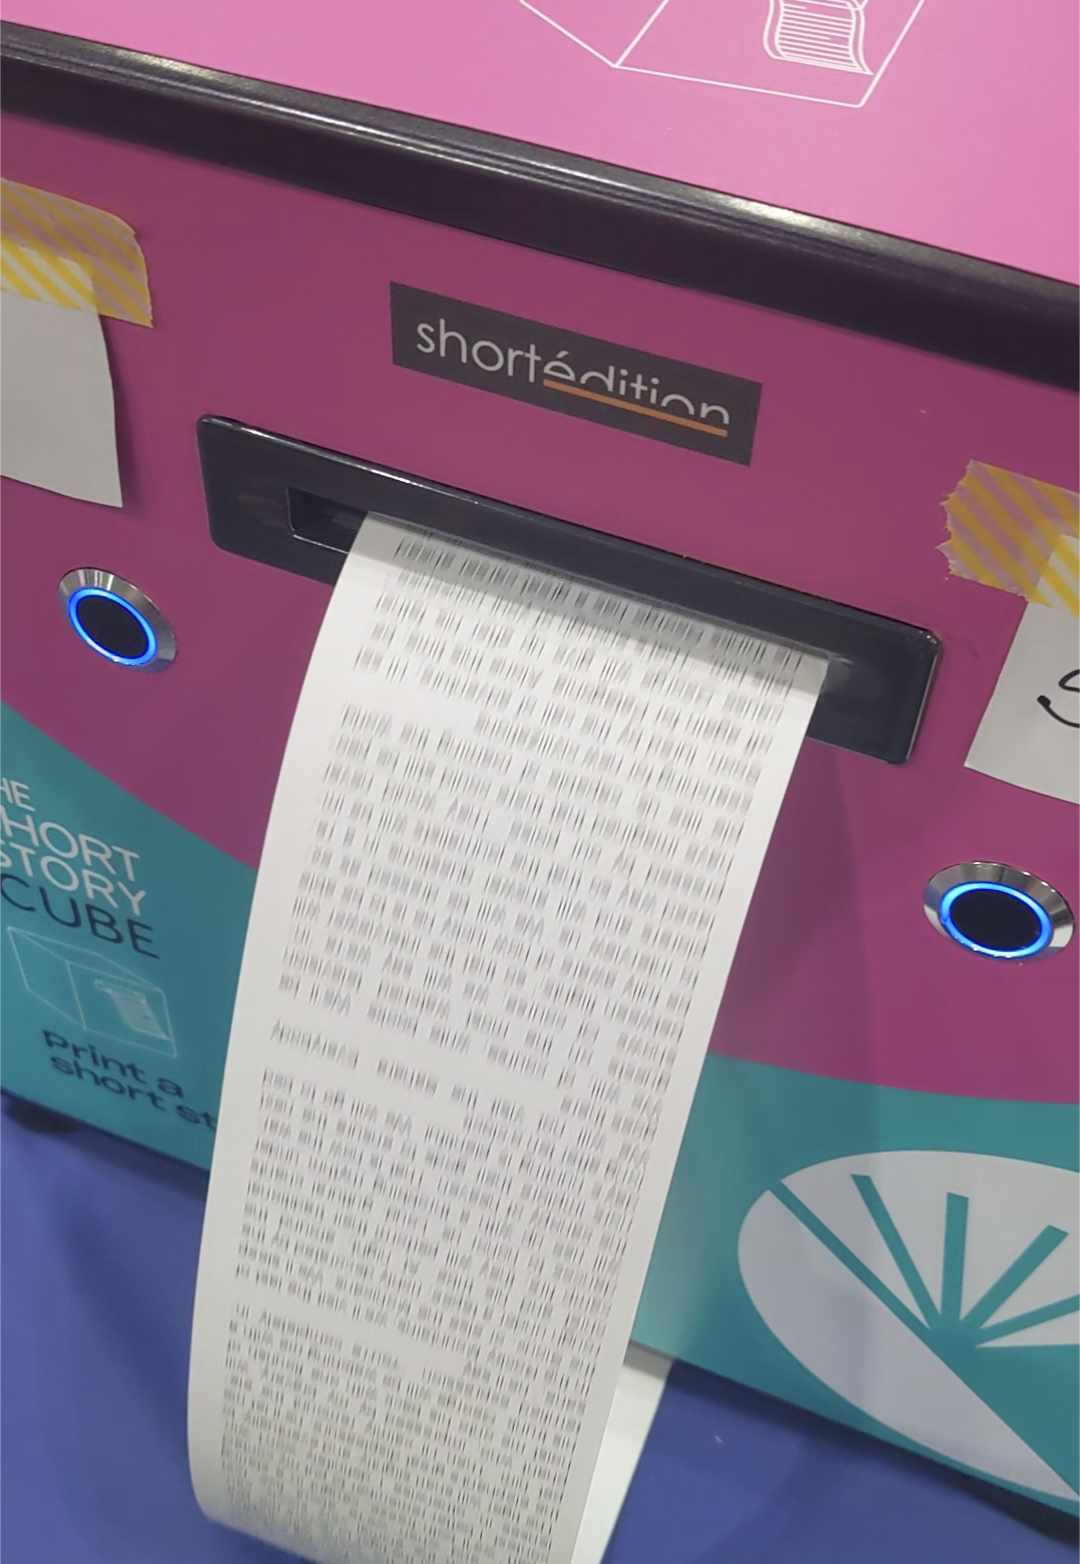 Short story machine printing out a short story